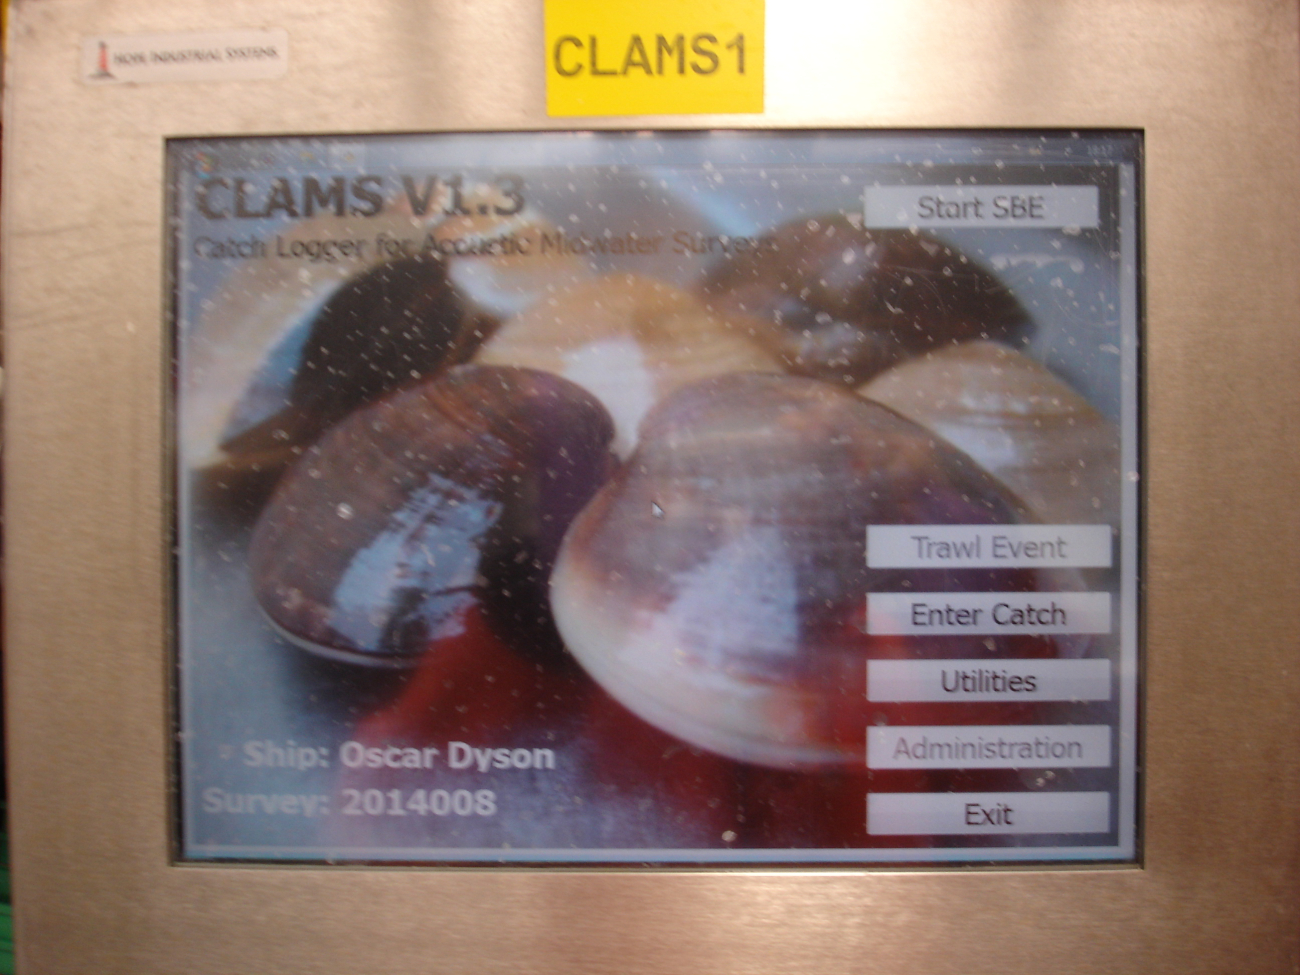 Catch Logger for Acoustic Midwater Surveys (CLAMS) Touch Screen Entry